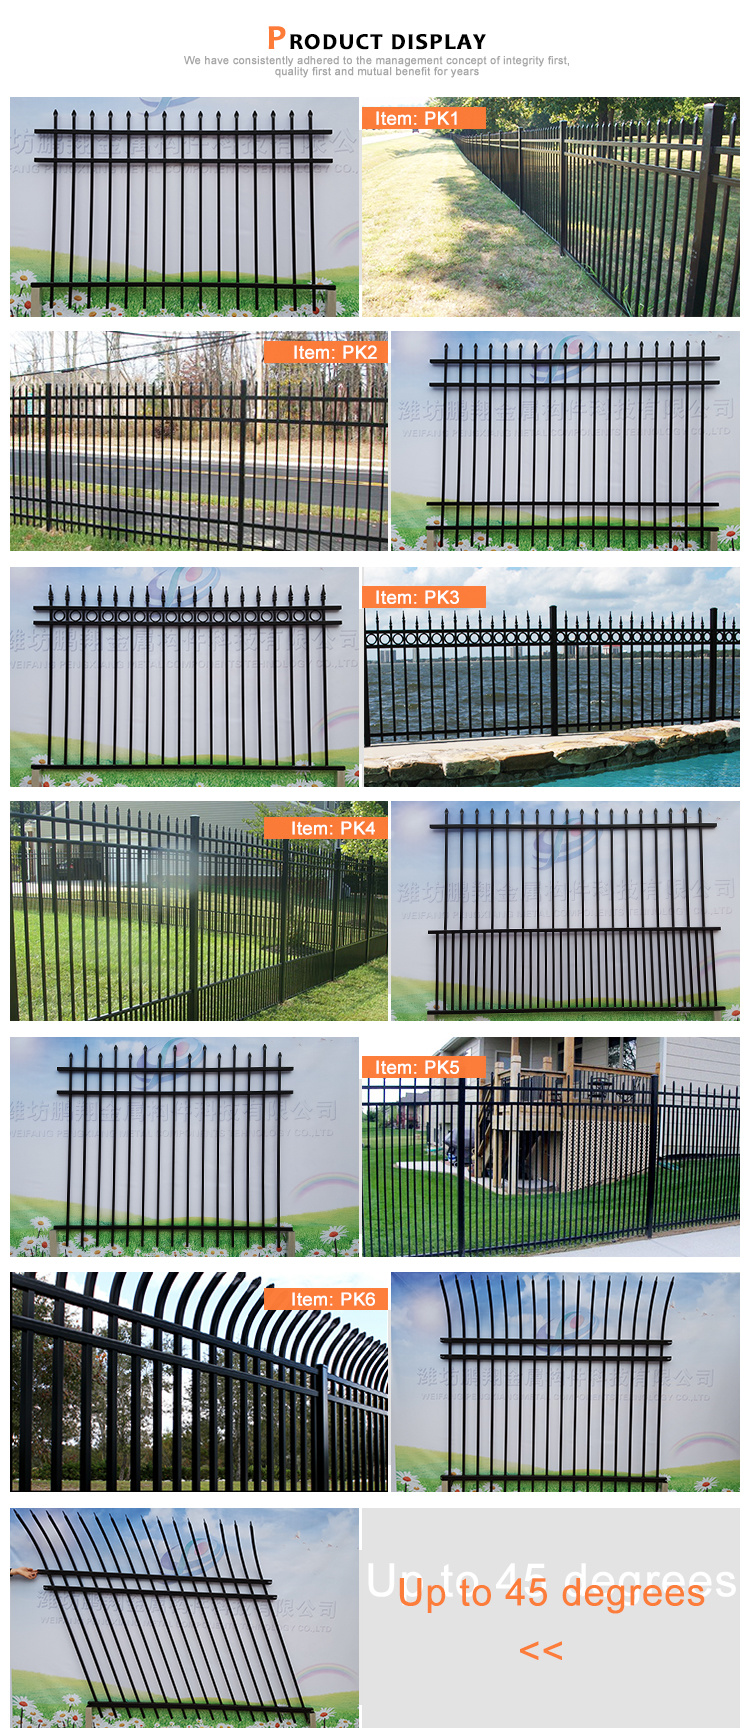 Pengxiang Home 2100mm Height Fence Black Galvanized Steel Tubular Fence